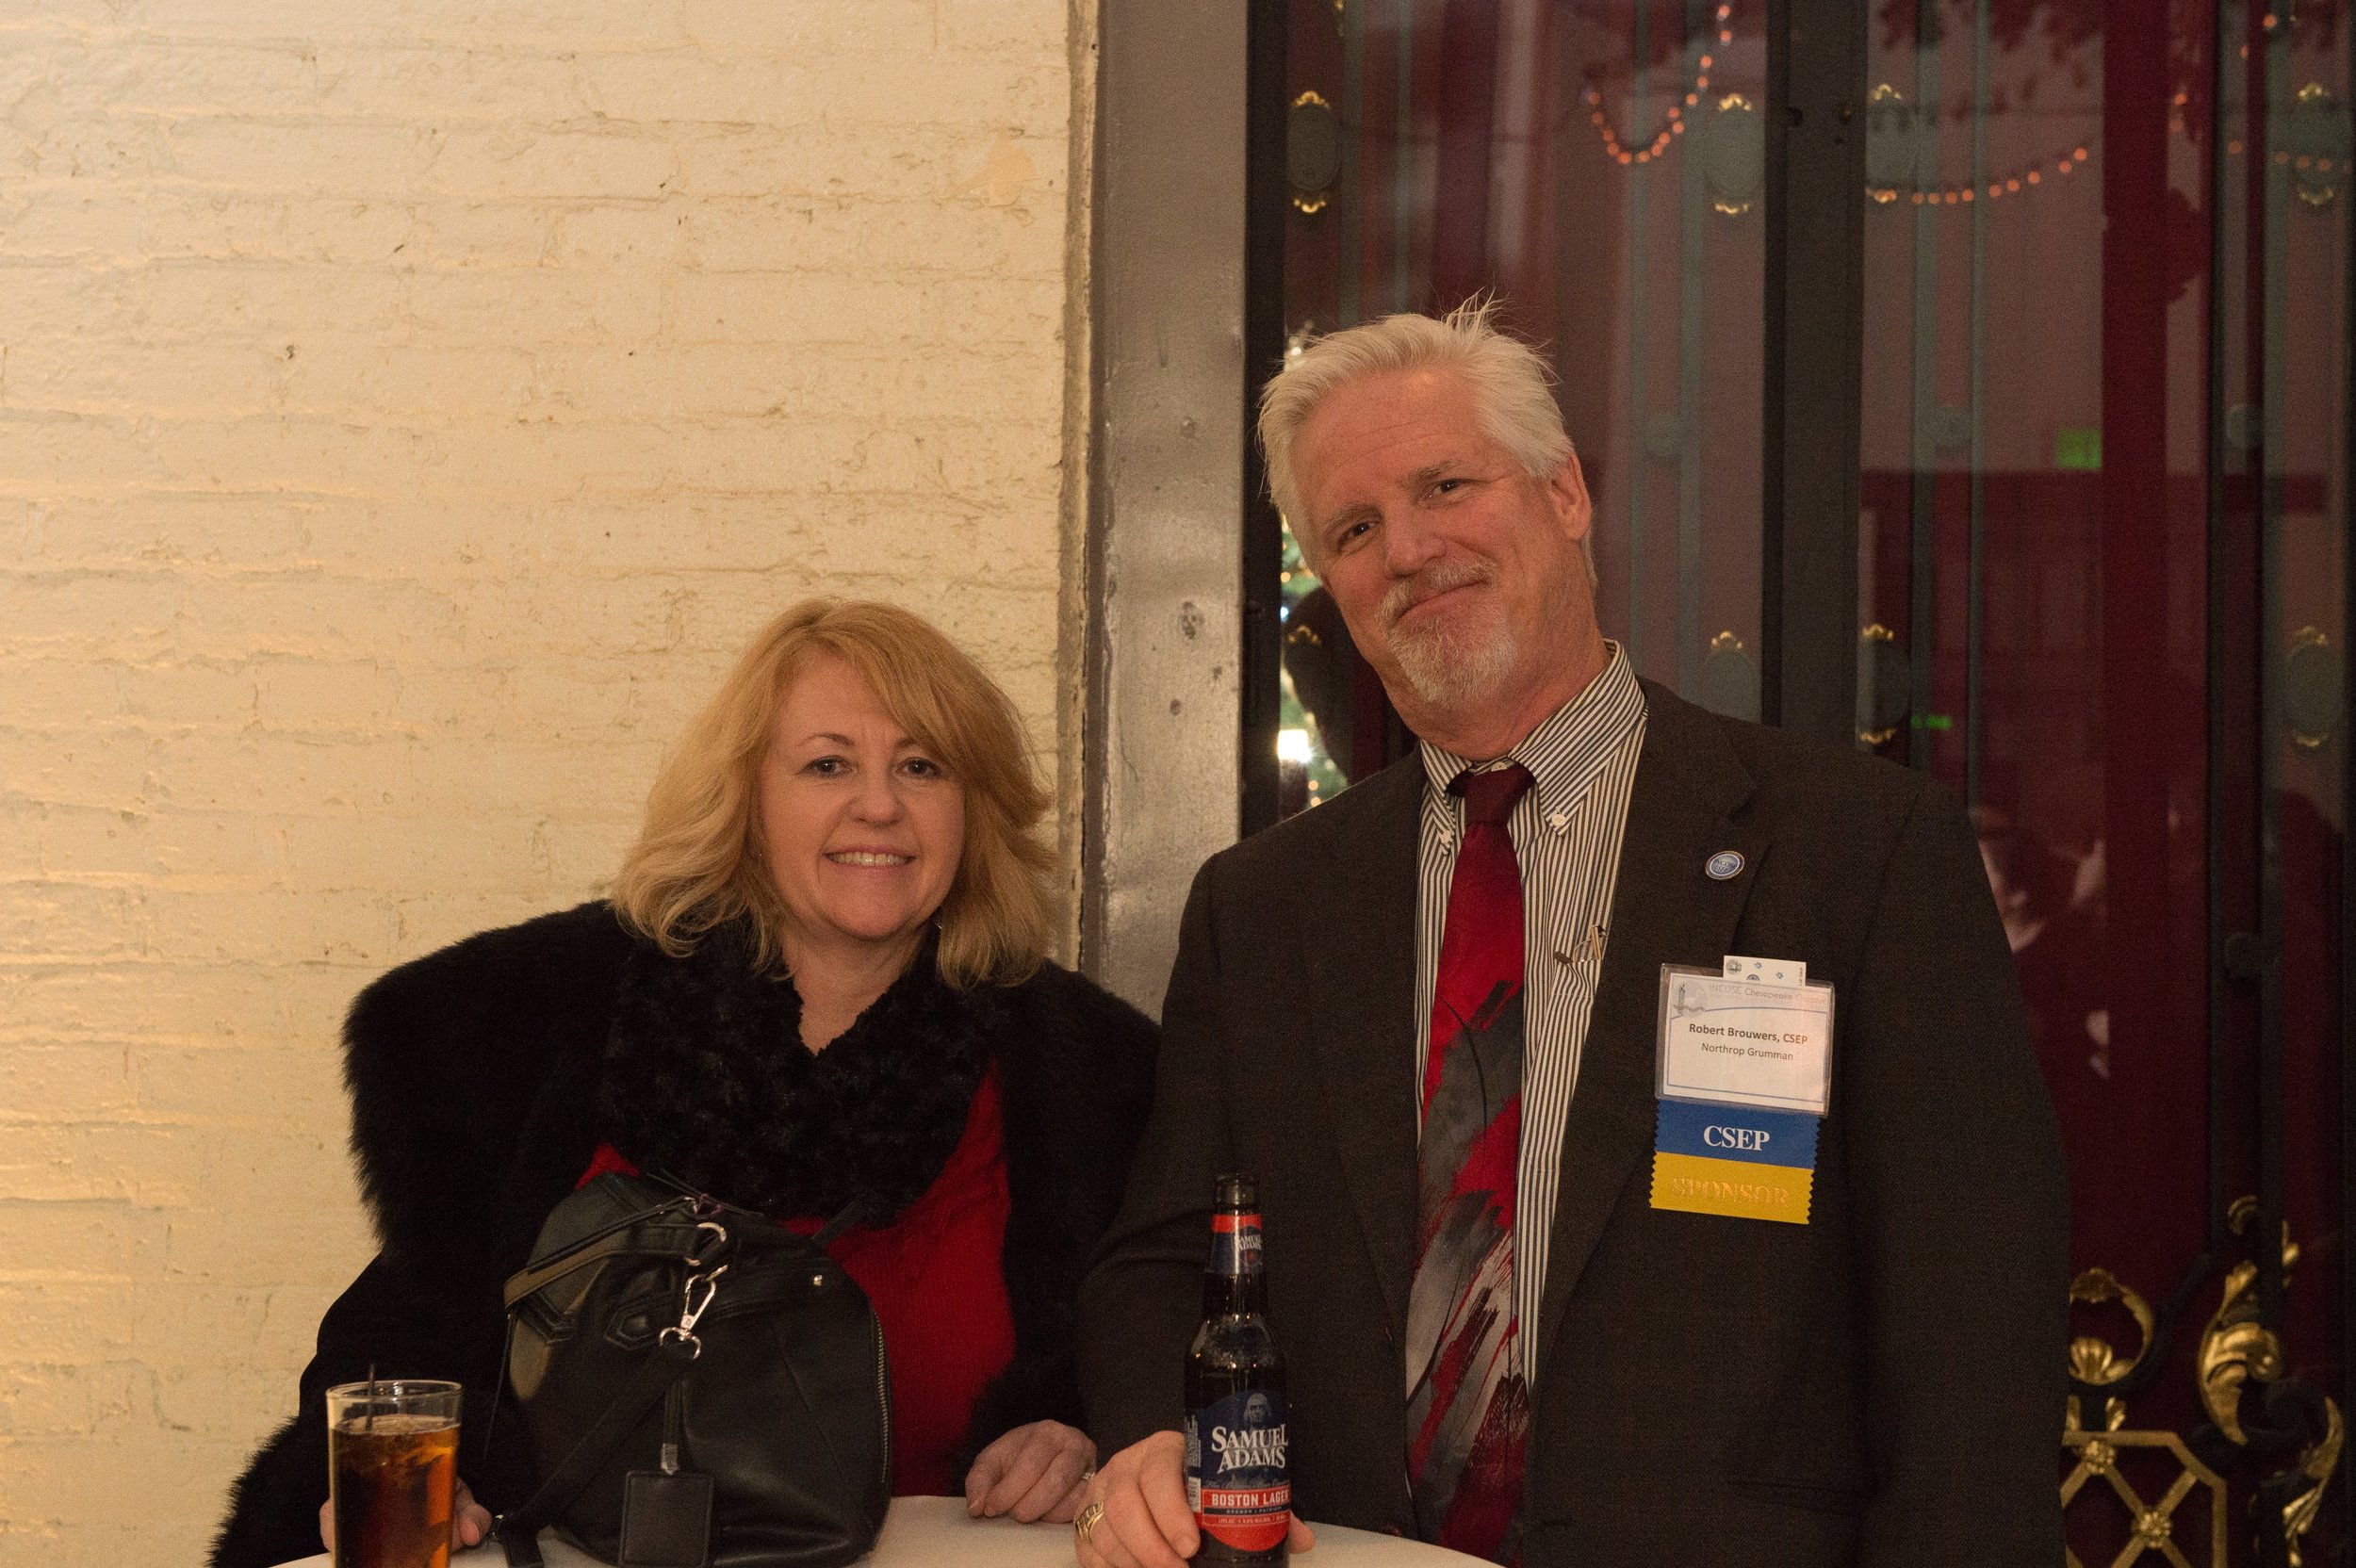 Bob and Candice Brouwers enjoying the holiday festivities at the Engineers Club in Baltimore